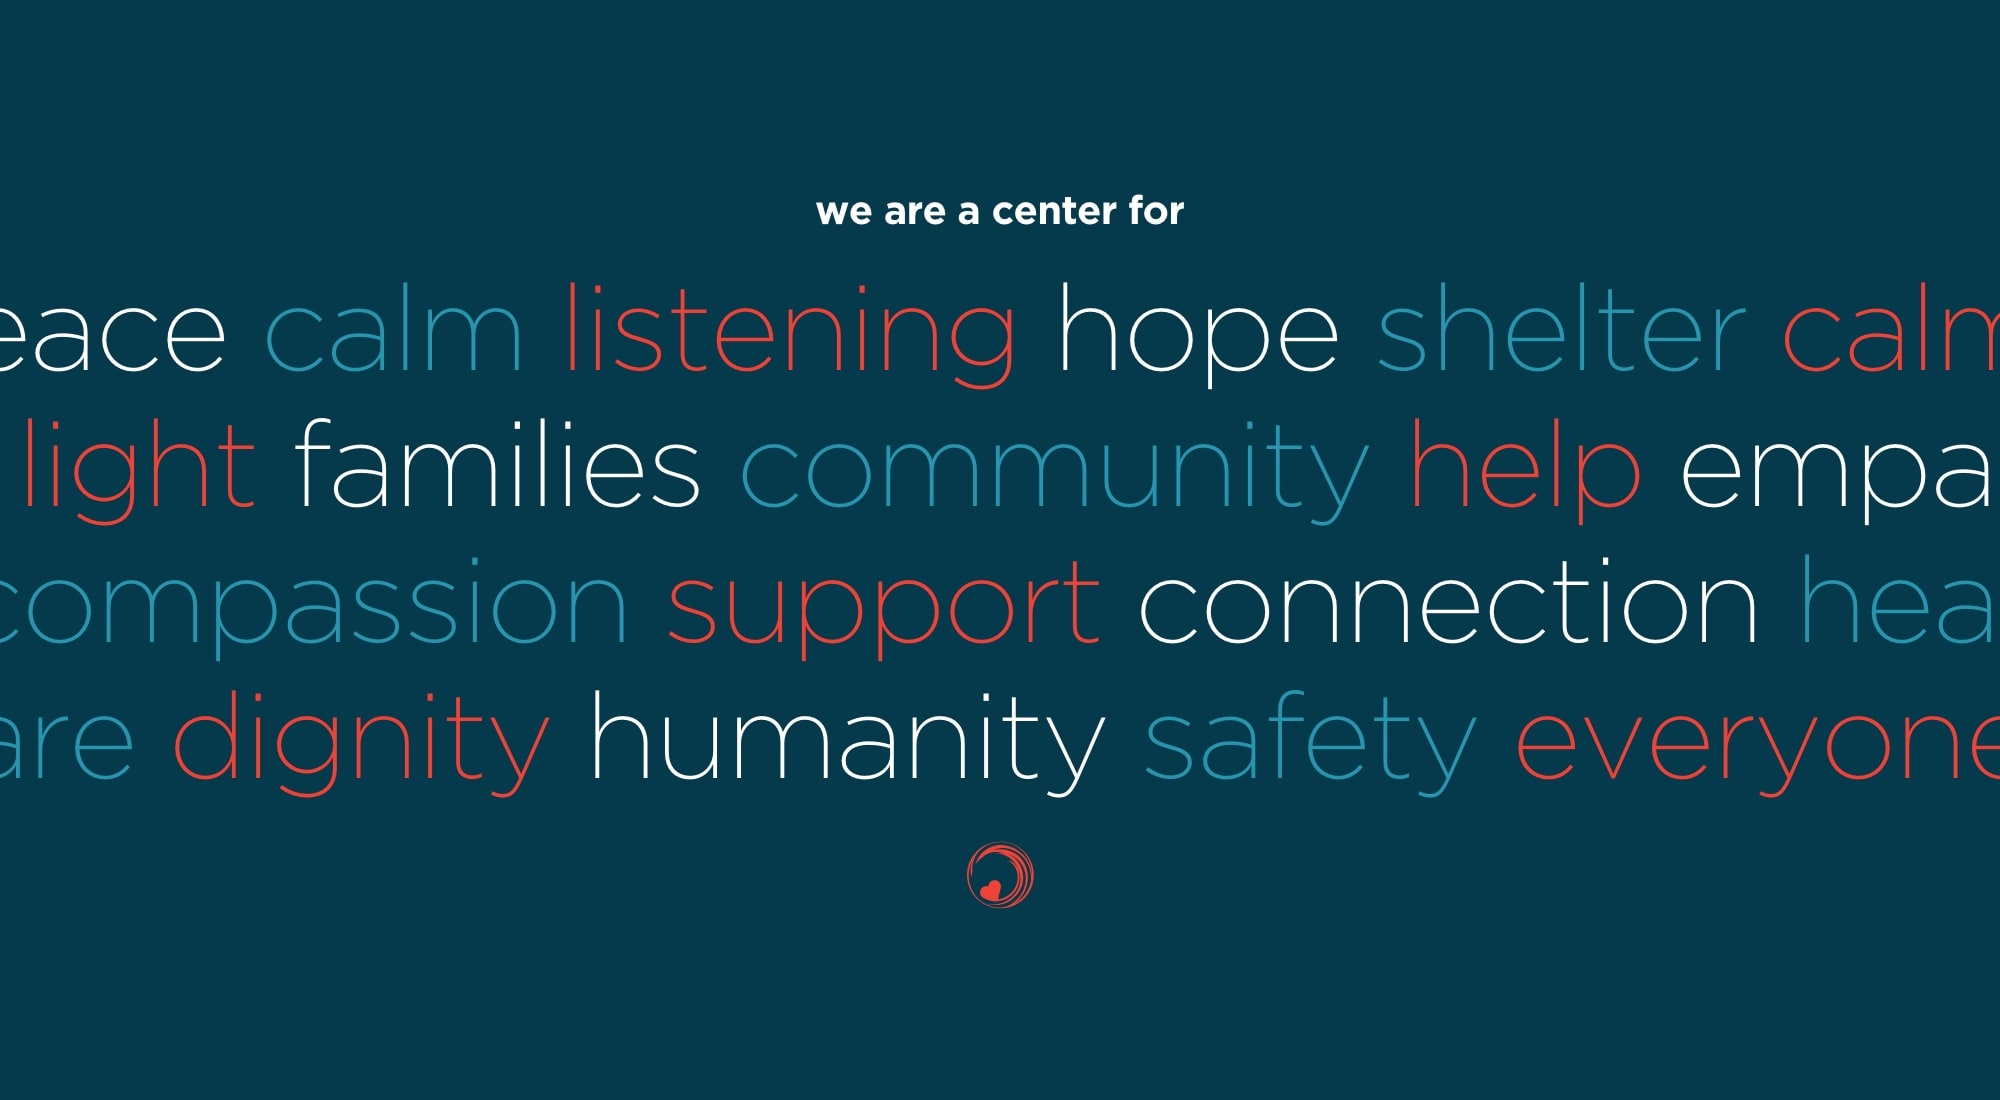 We are a center for peace, calm, listening, hope, shelter, calm, families, community, help, empathy, support, connection ...